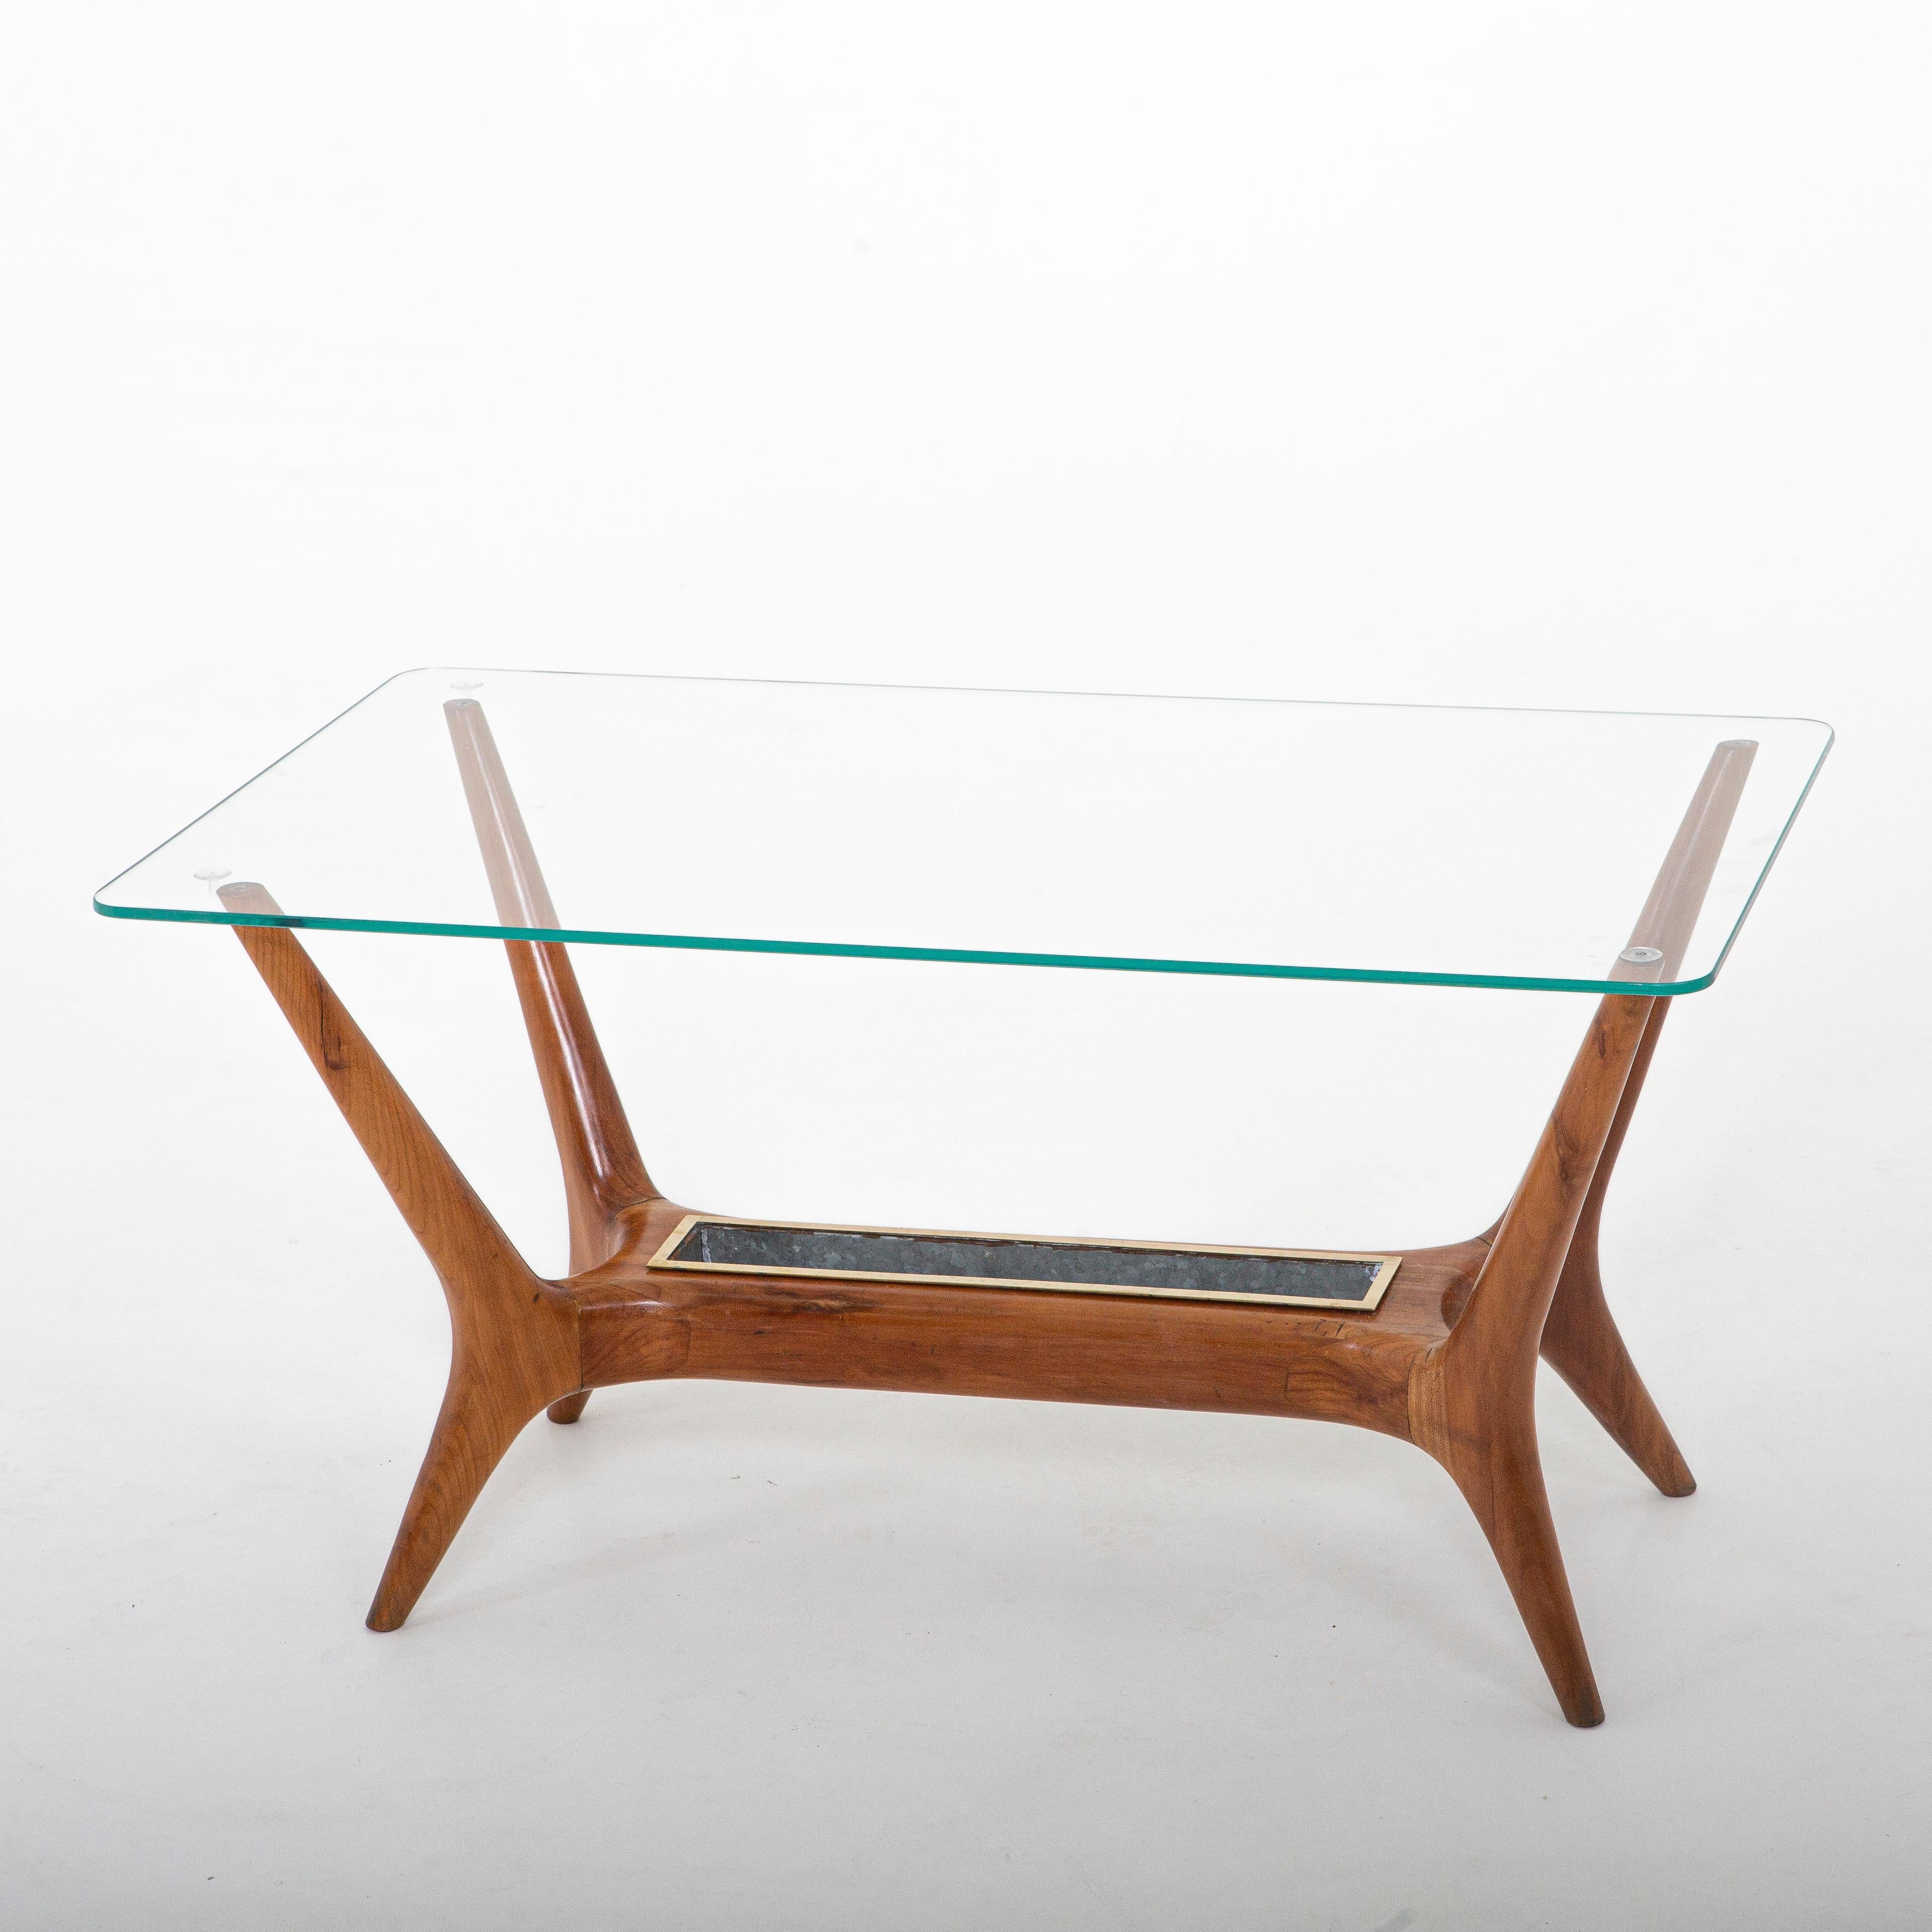 Italian modernist cocktail table attributed to Gio Ponti.
Walnut, glass top, brass planter insert.